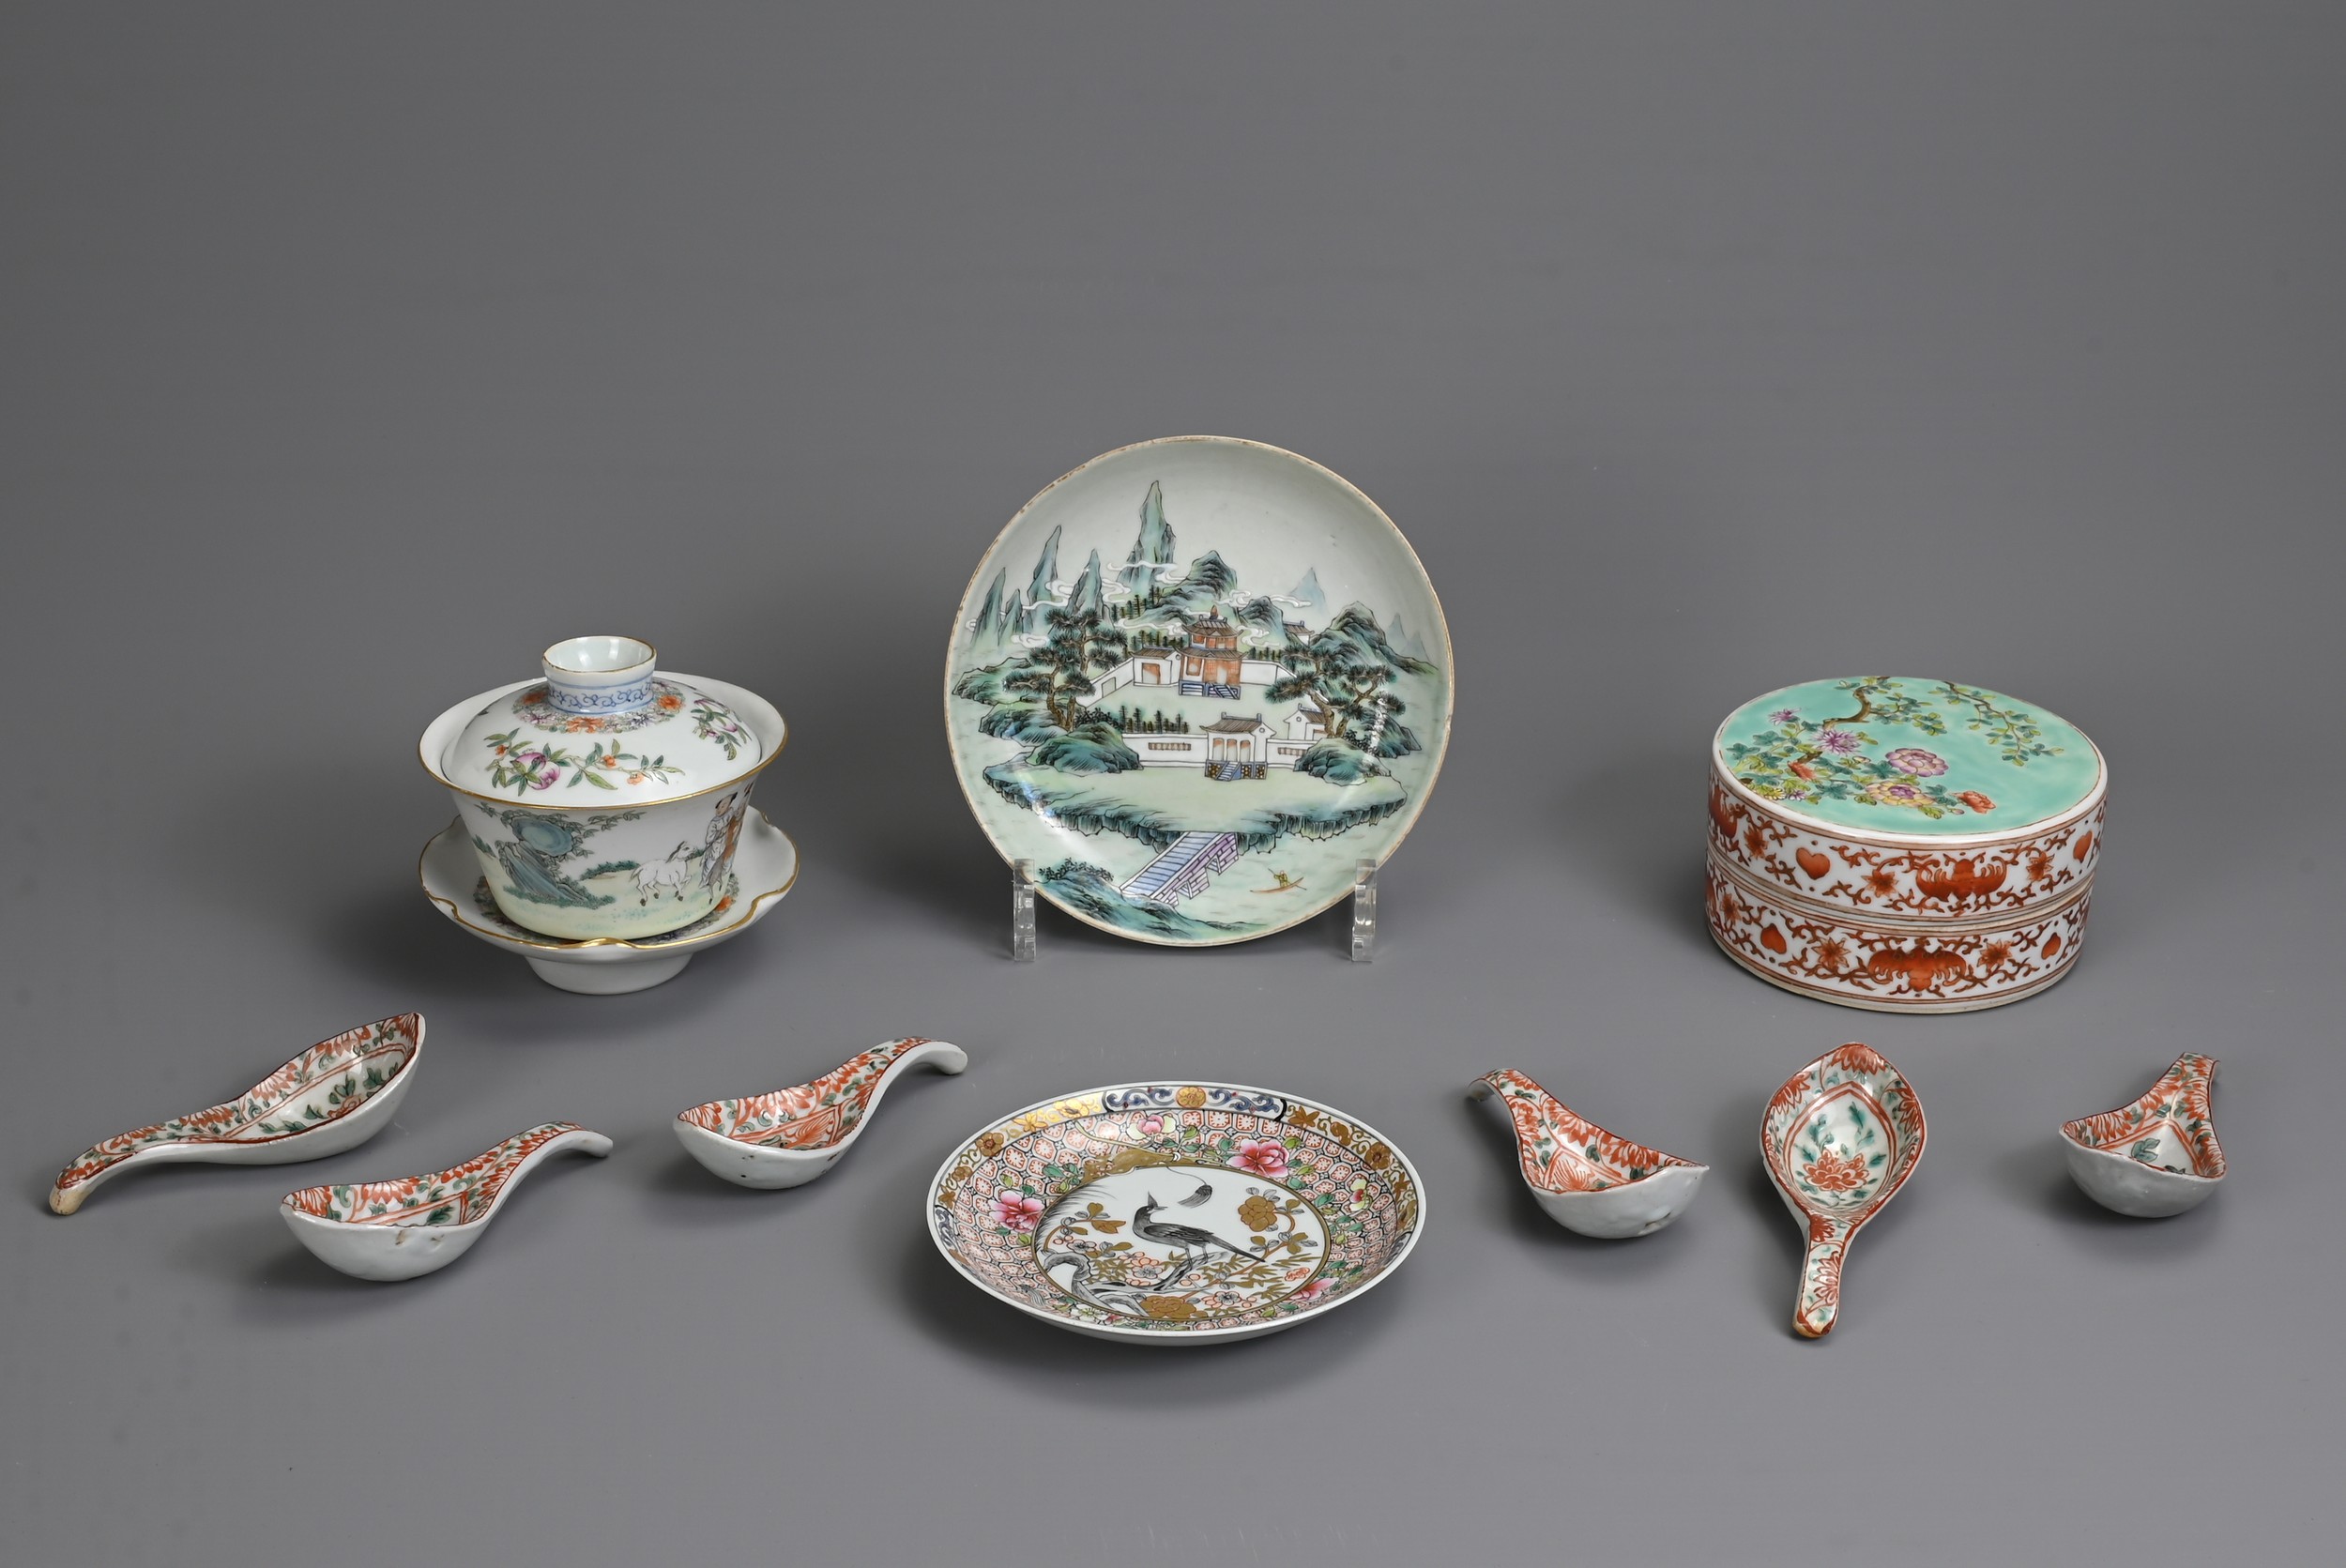 SIX CHINESE PORCELAIN SPOONS, QING DYNASTY. Decorated with red, green and yellow enamels. Two